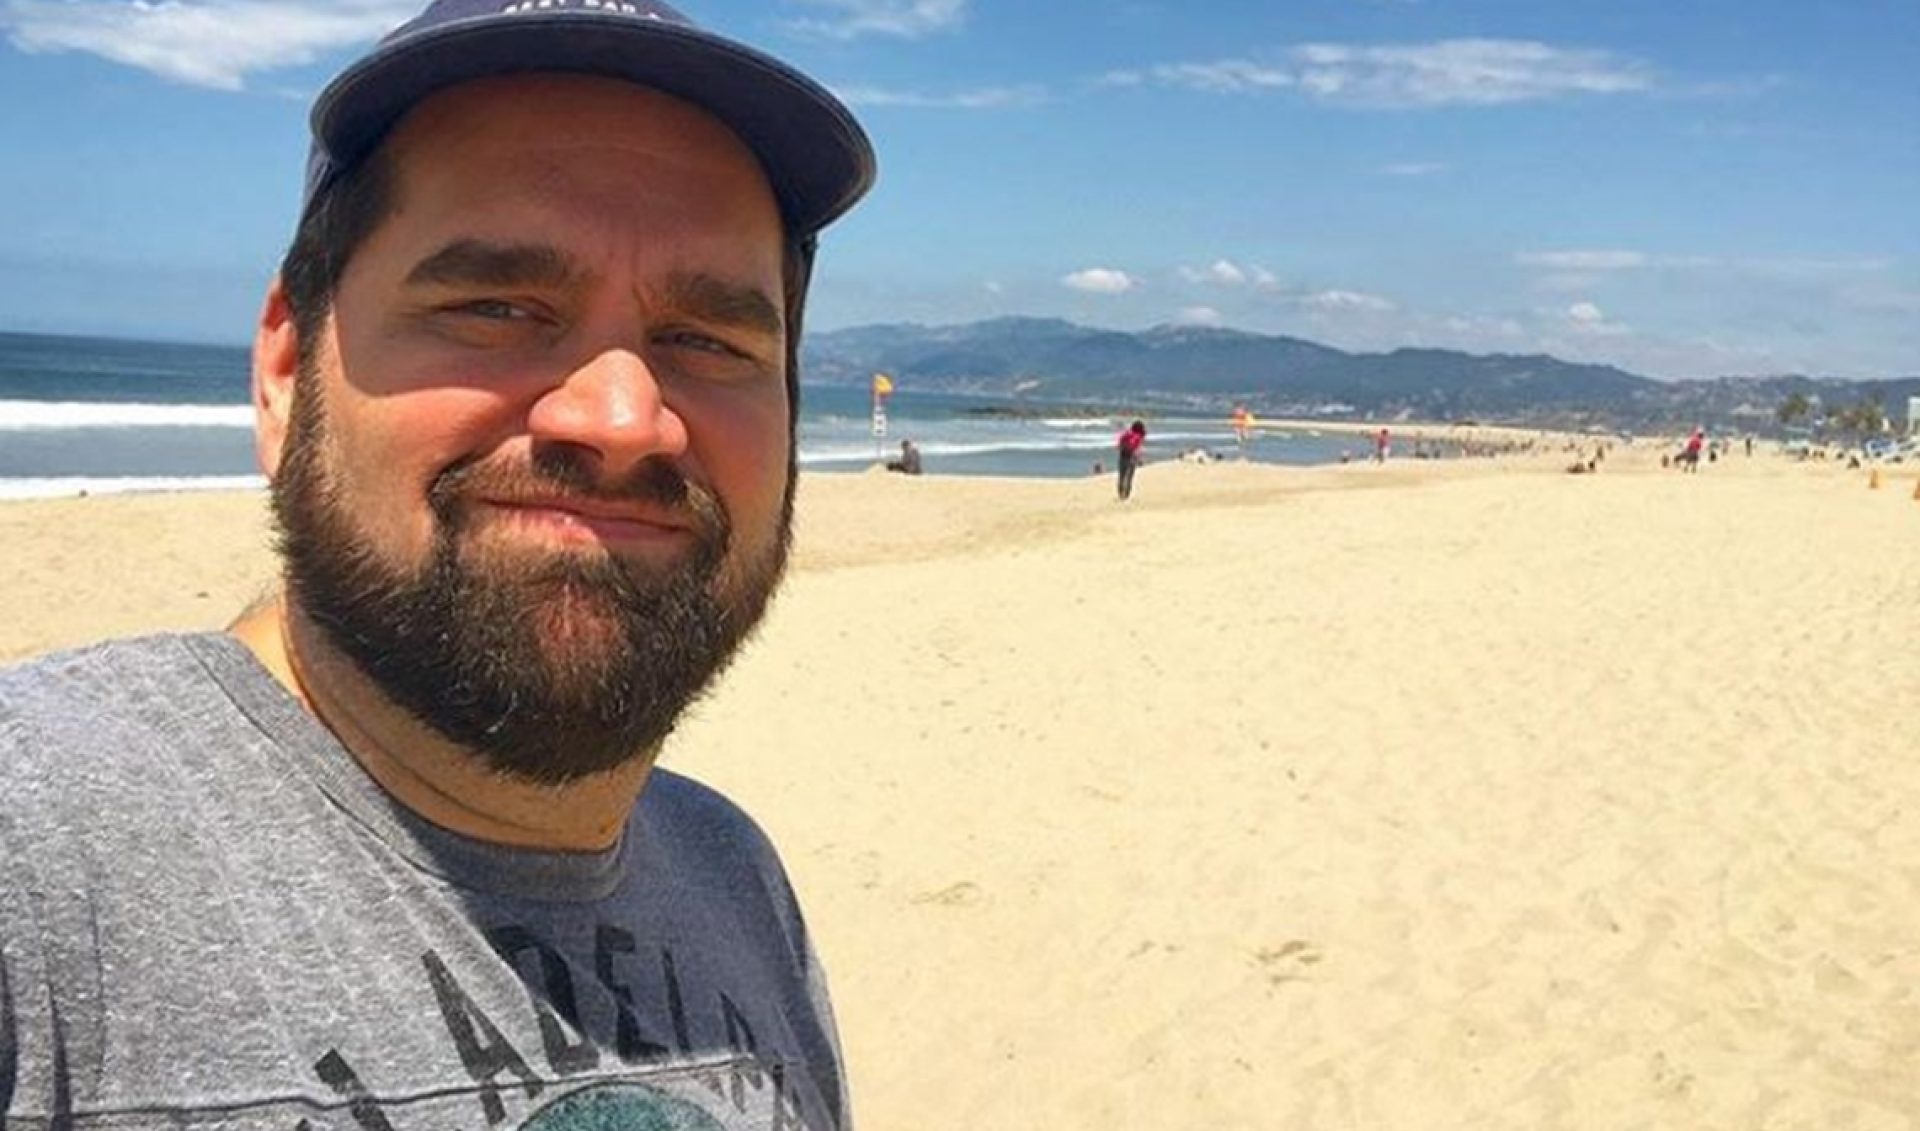 Andy Signore Acknowledges “Appalling” Behavior, But Fiercely Refutes Allegations Of Sexual Assault